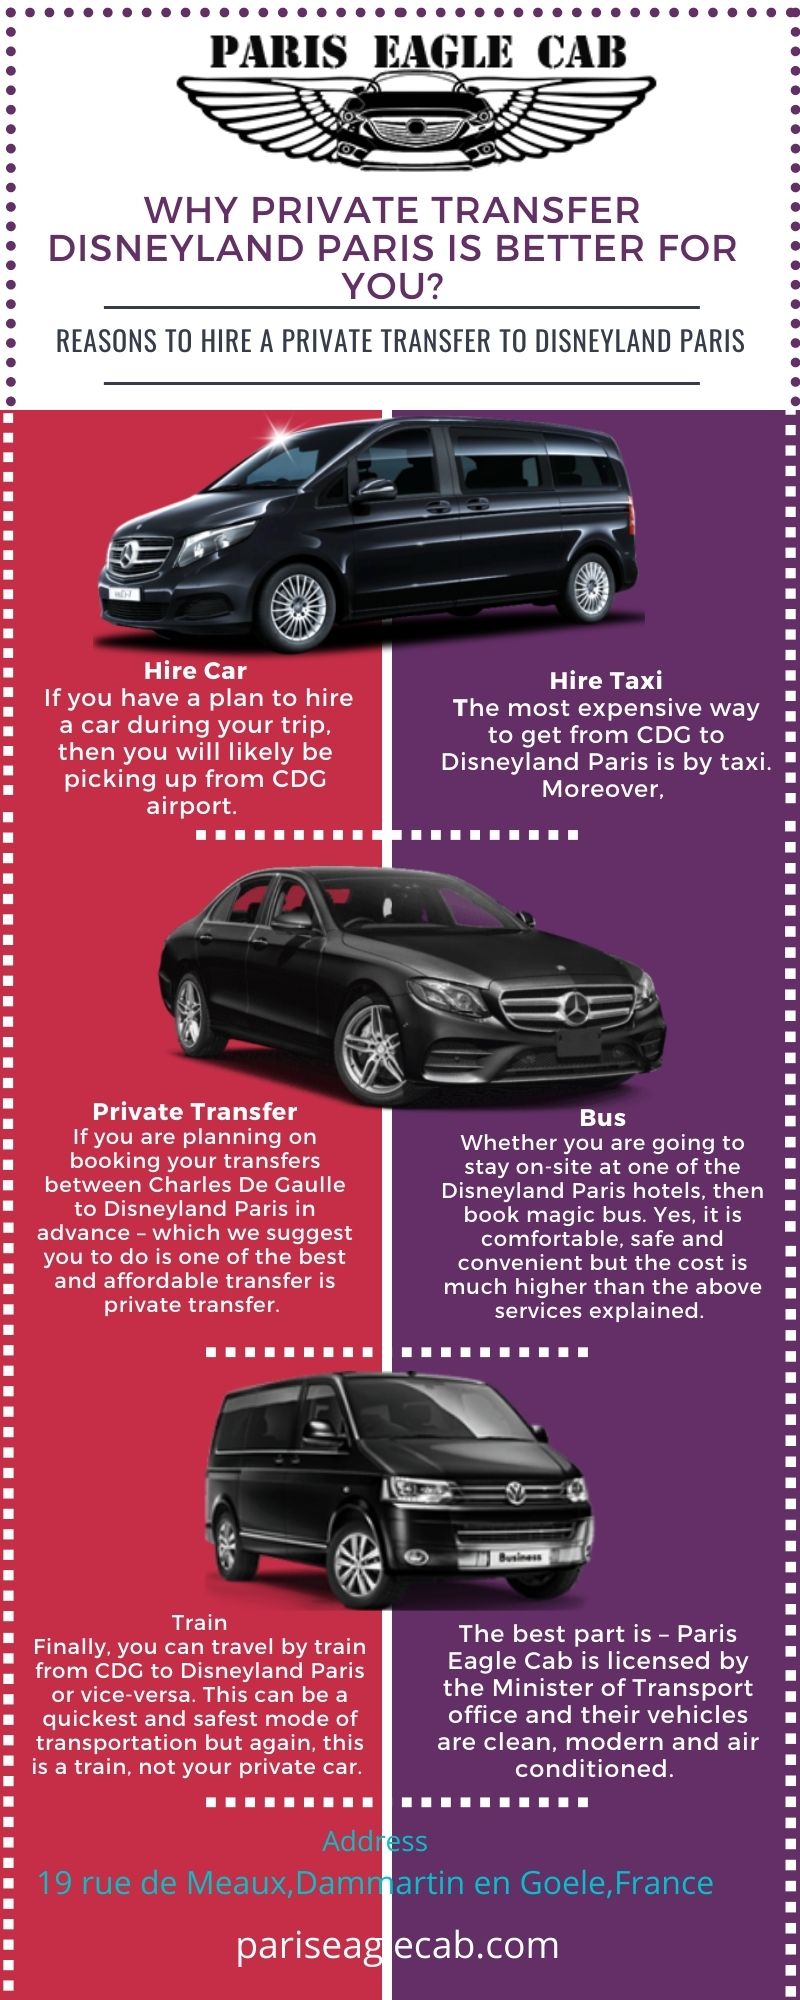 Why Private Transfer Disneyland Paris Is Better for You.jpg  by Pariseaglecab